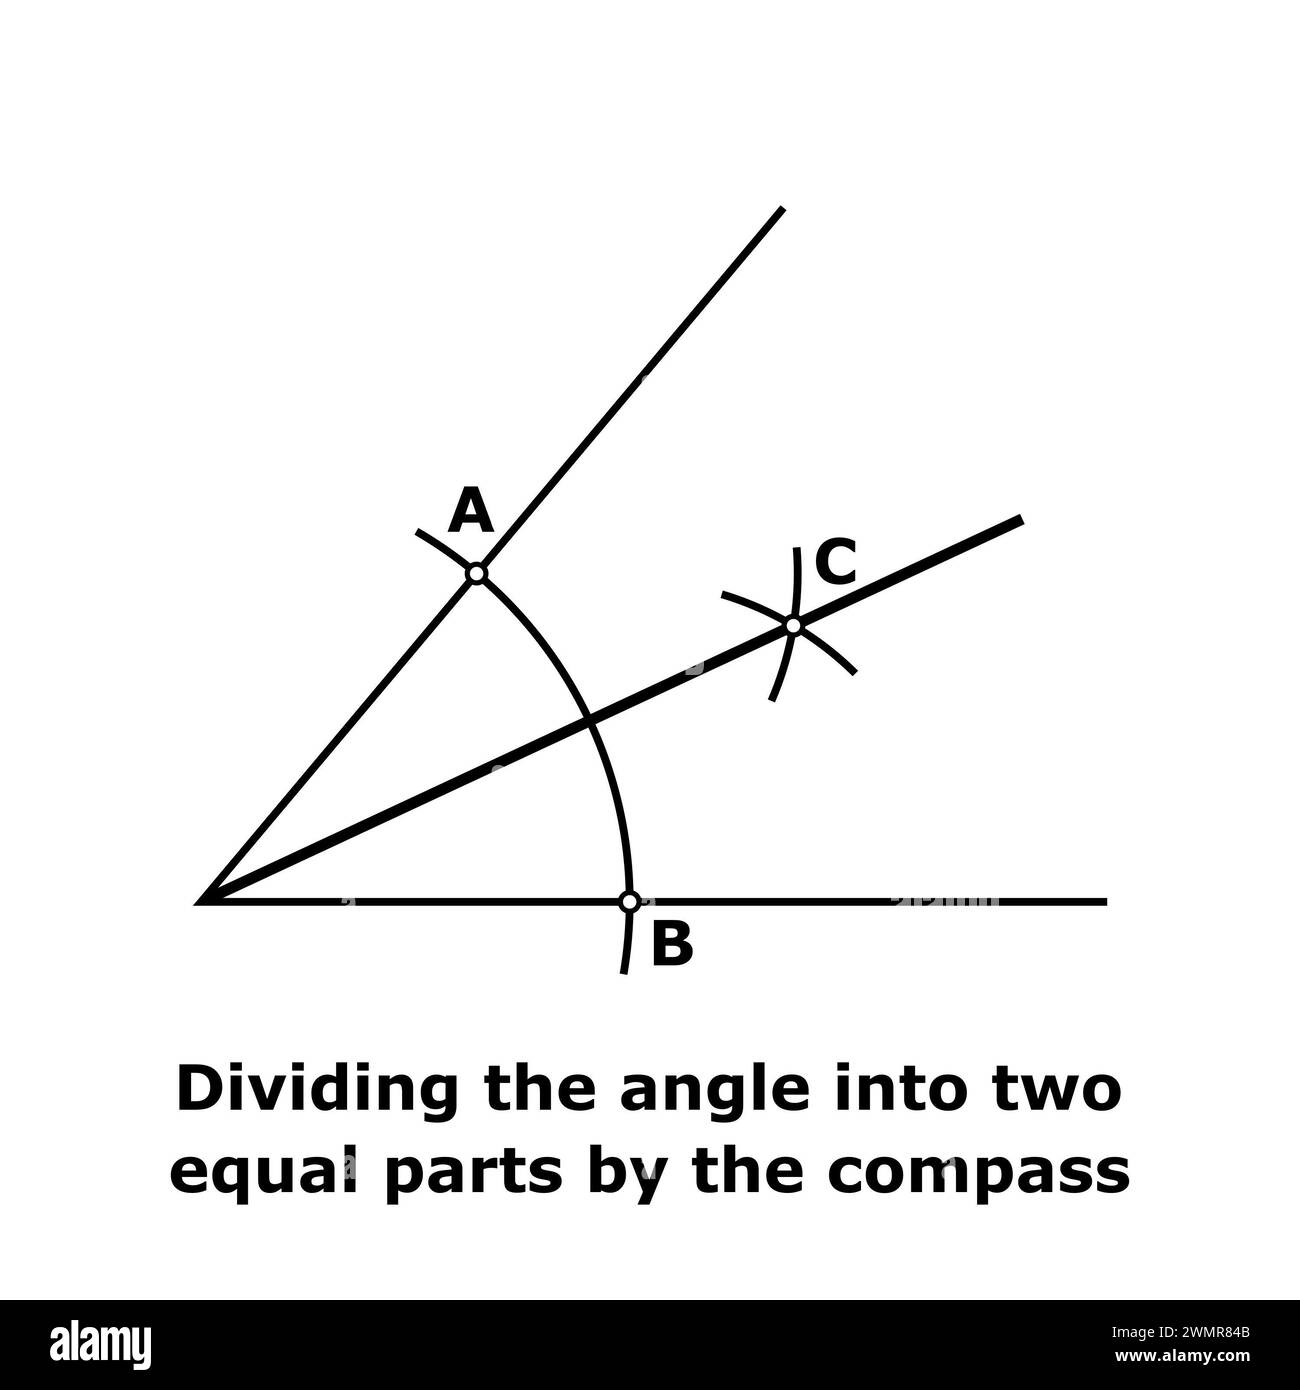 Dividing the angle into two equal parts by the compass illustration Stock Photo